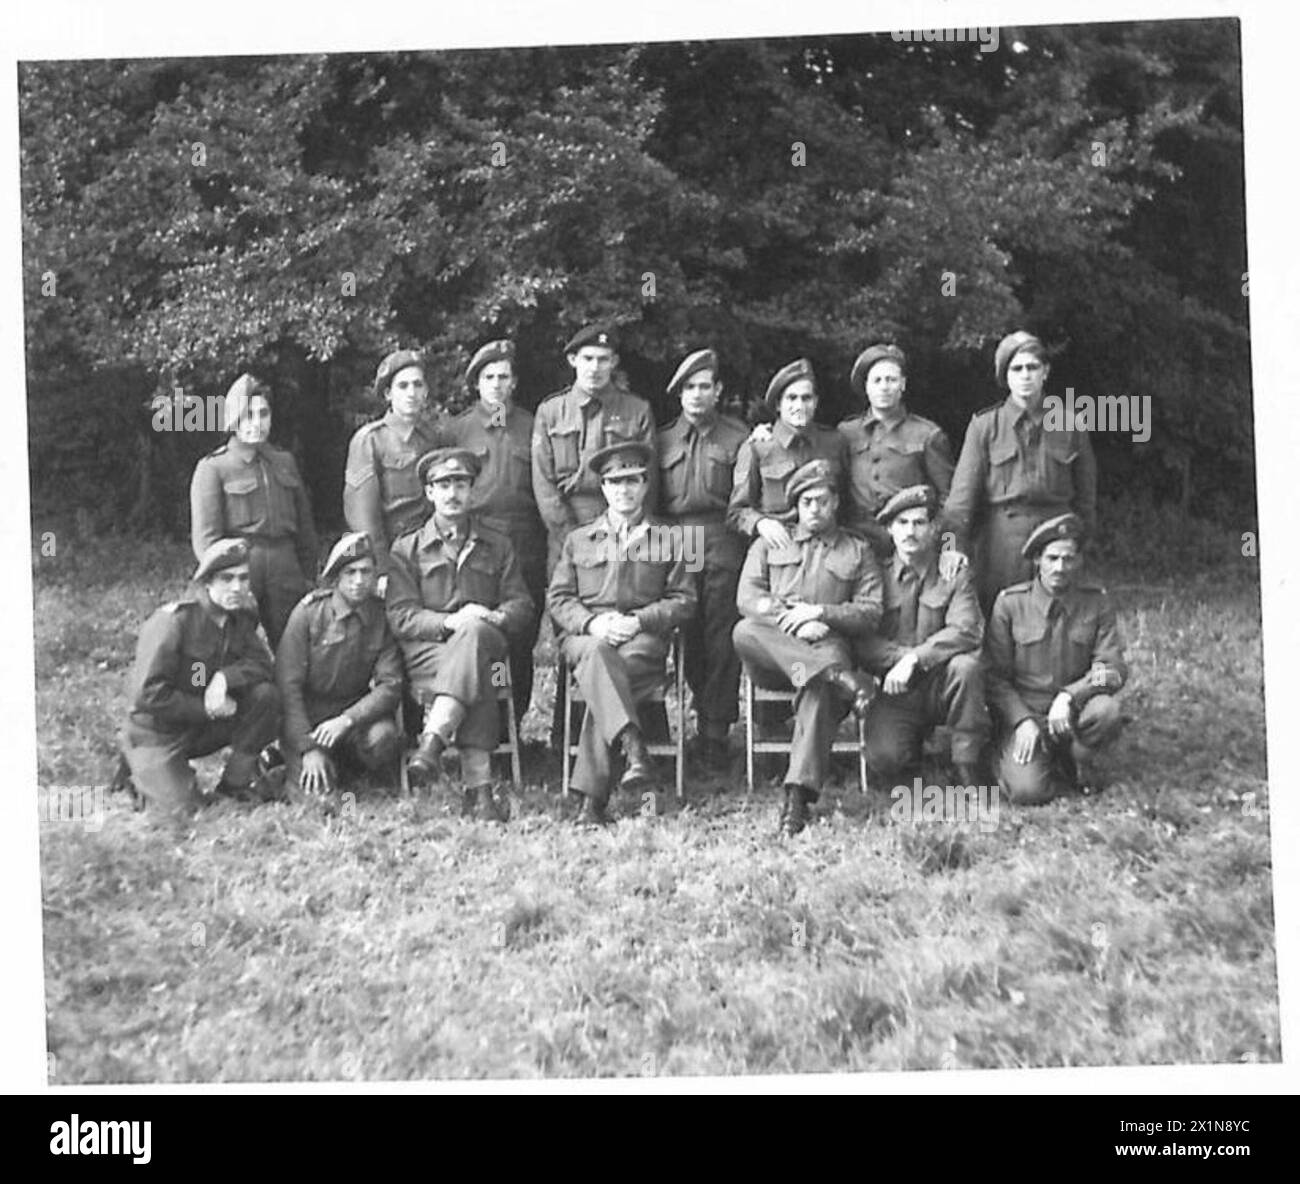 ARAB, ETC. EX-PRISONERS OF WAR IN ENGLAND - Staff Group Seated centre front - left to right - Lieutenant El Khalidi, Captain Anhoury, A.C. CSM Tarhuni, O. Remainder - left to right - Private S. Kaladgian Private J. Abu-Shaar Private A. Masri Sergeant N. Issa Private A. Abbas Private F.R. Chivers Private A. Mortada Sergeant A. Thakidin Lance Corporal I. Farrah Private S. Zakarira Private A. Sheihab Private A. Nijm, British Army Stock Photo